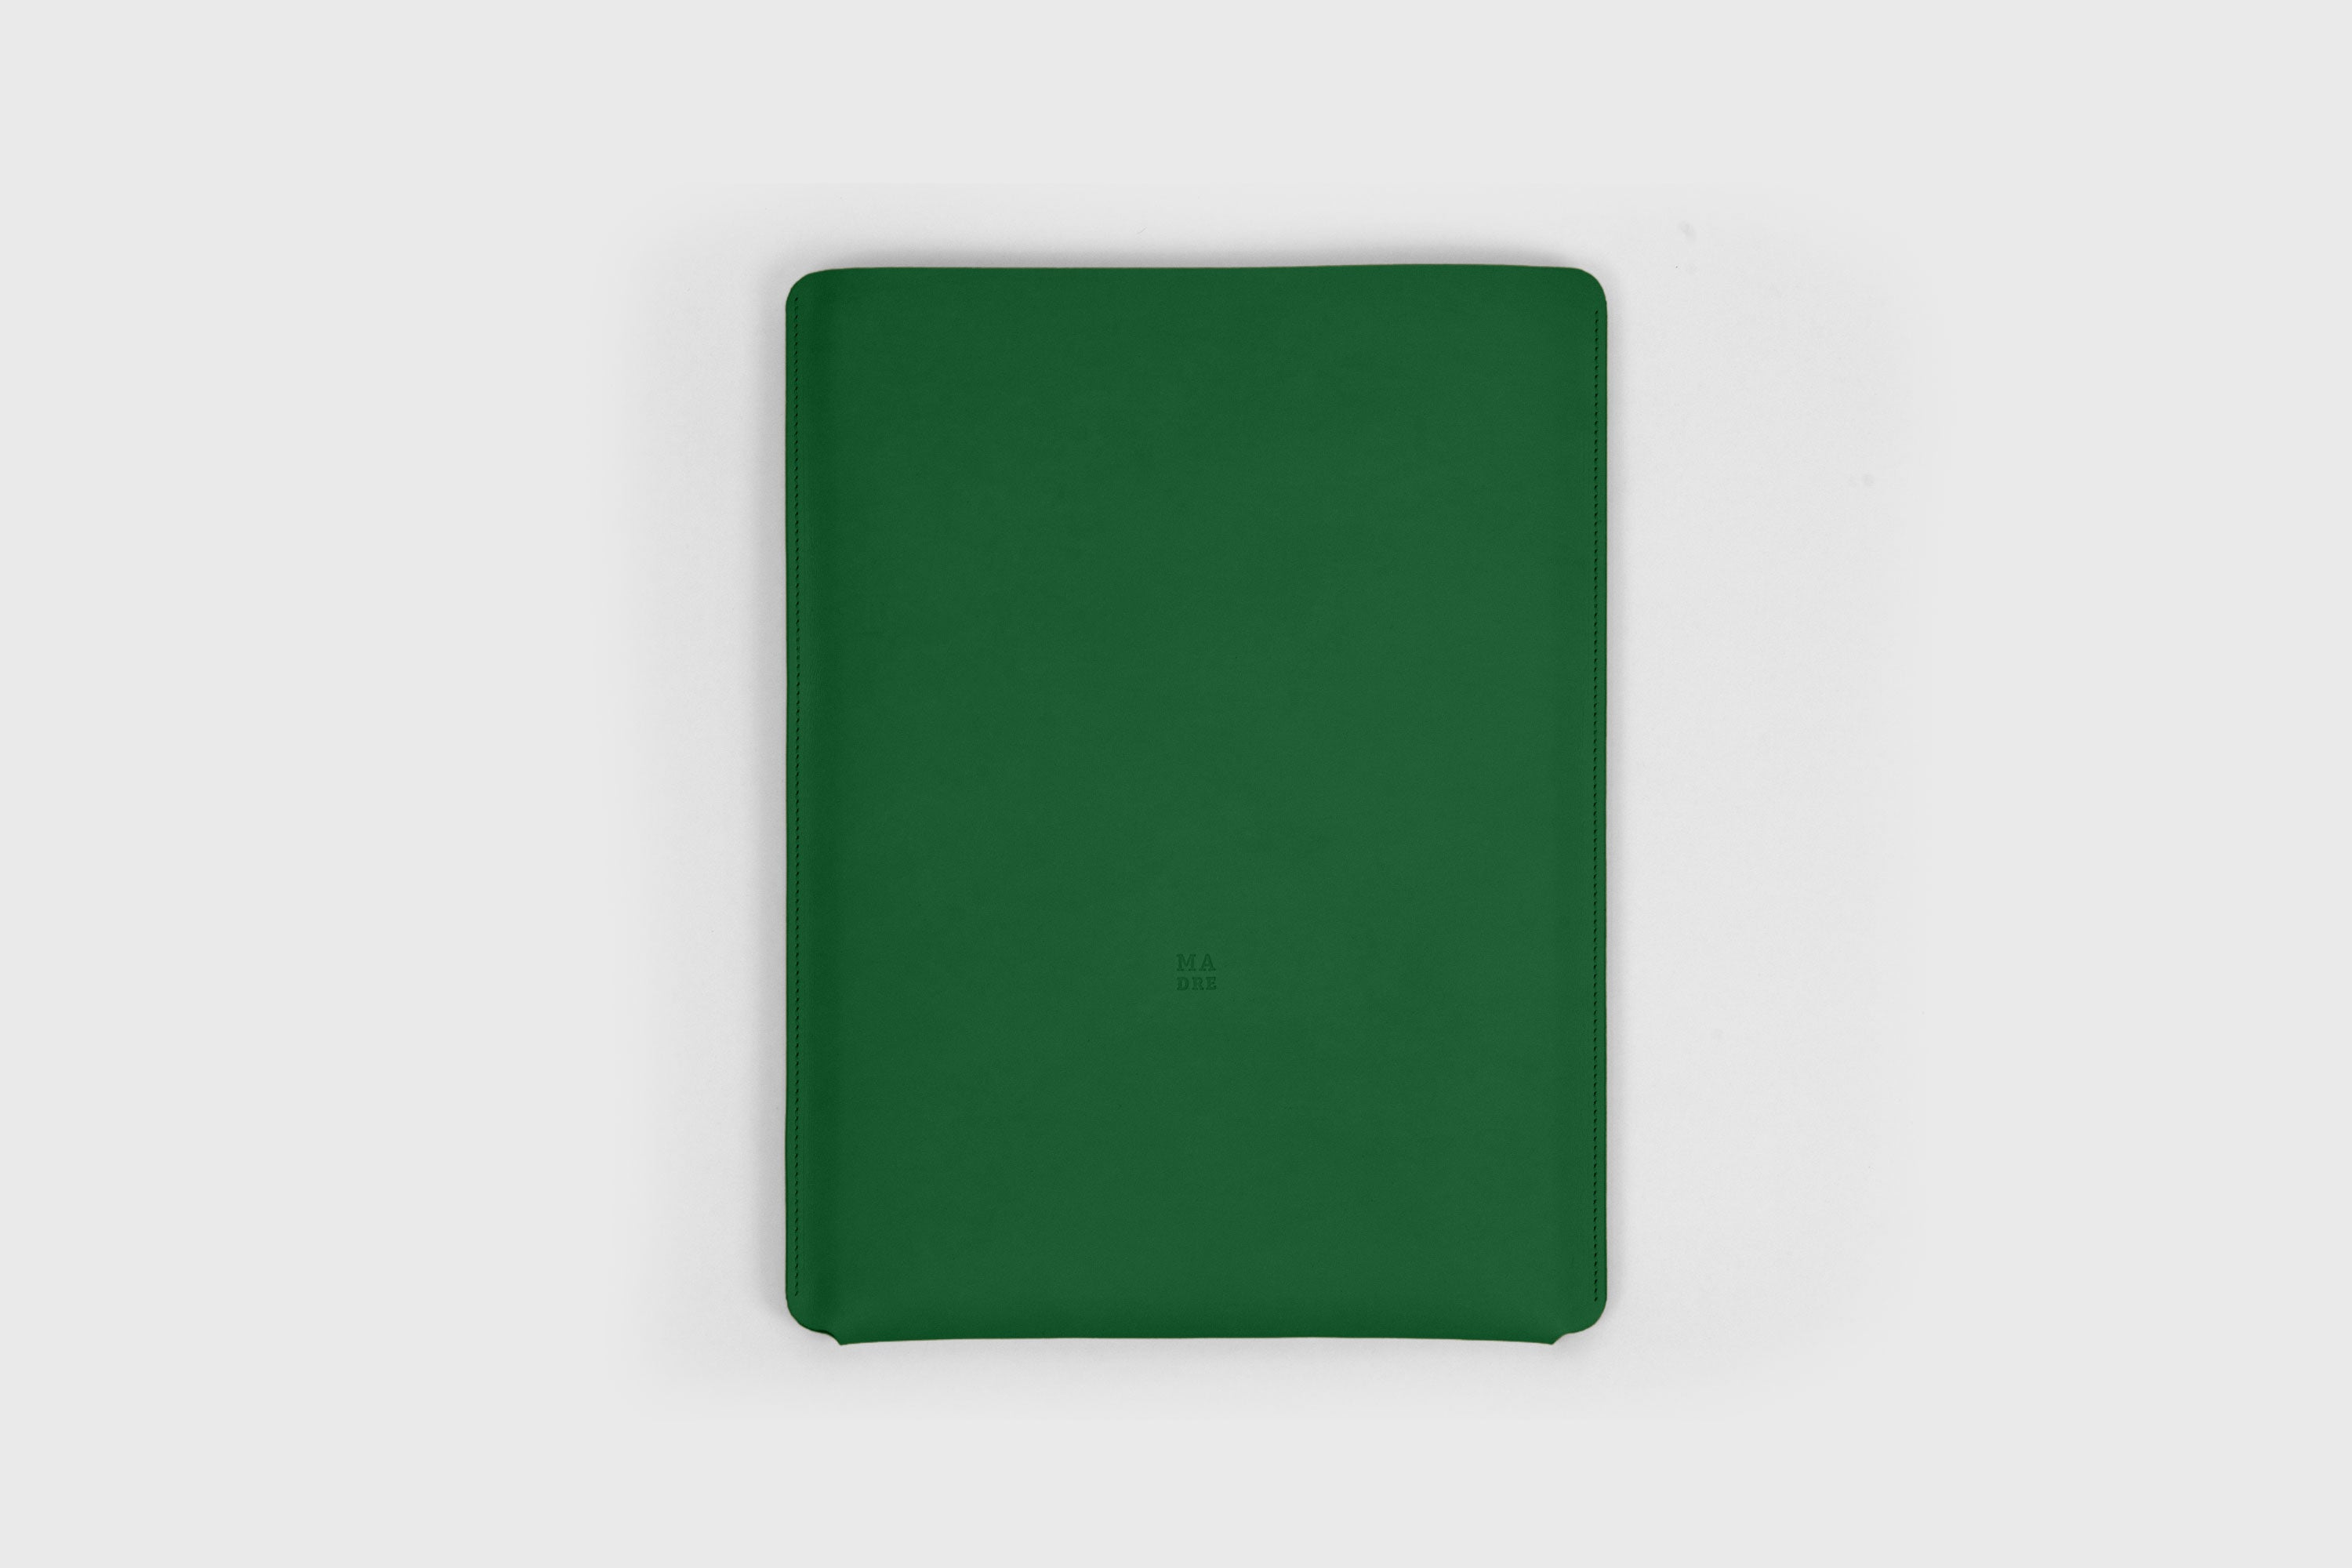 MacBook Pro Sleeve 16 Inch Leather Premium Grass Green Vegetable Tanned Leather Minimalistic Design By Manuel Dreesmann Atelier Madre Barcelona Spain